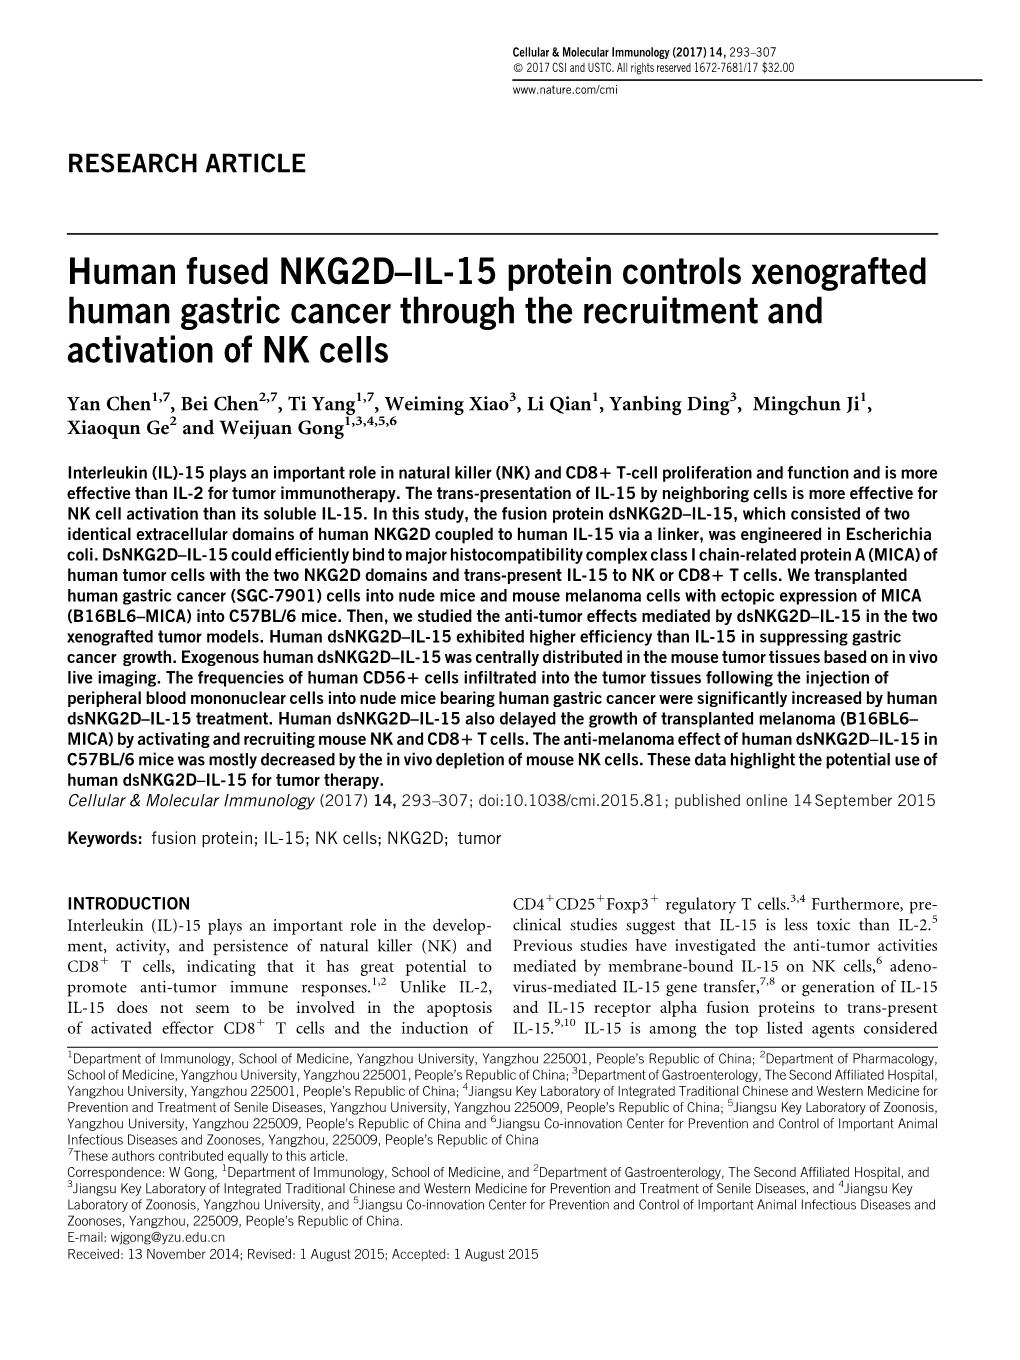 Human Fused NKG2D–IL-15 Protein Controls Xenografted Human Gastric Cancer Through the Recruitment and Activation of NK Cells